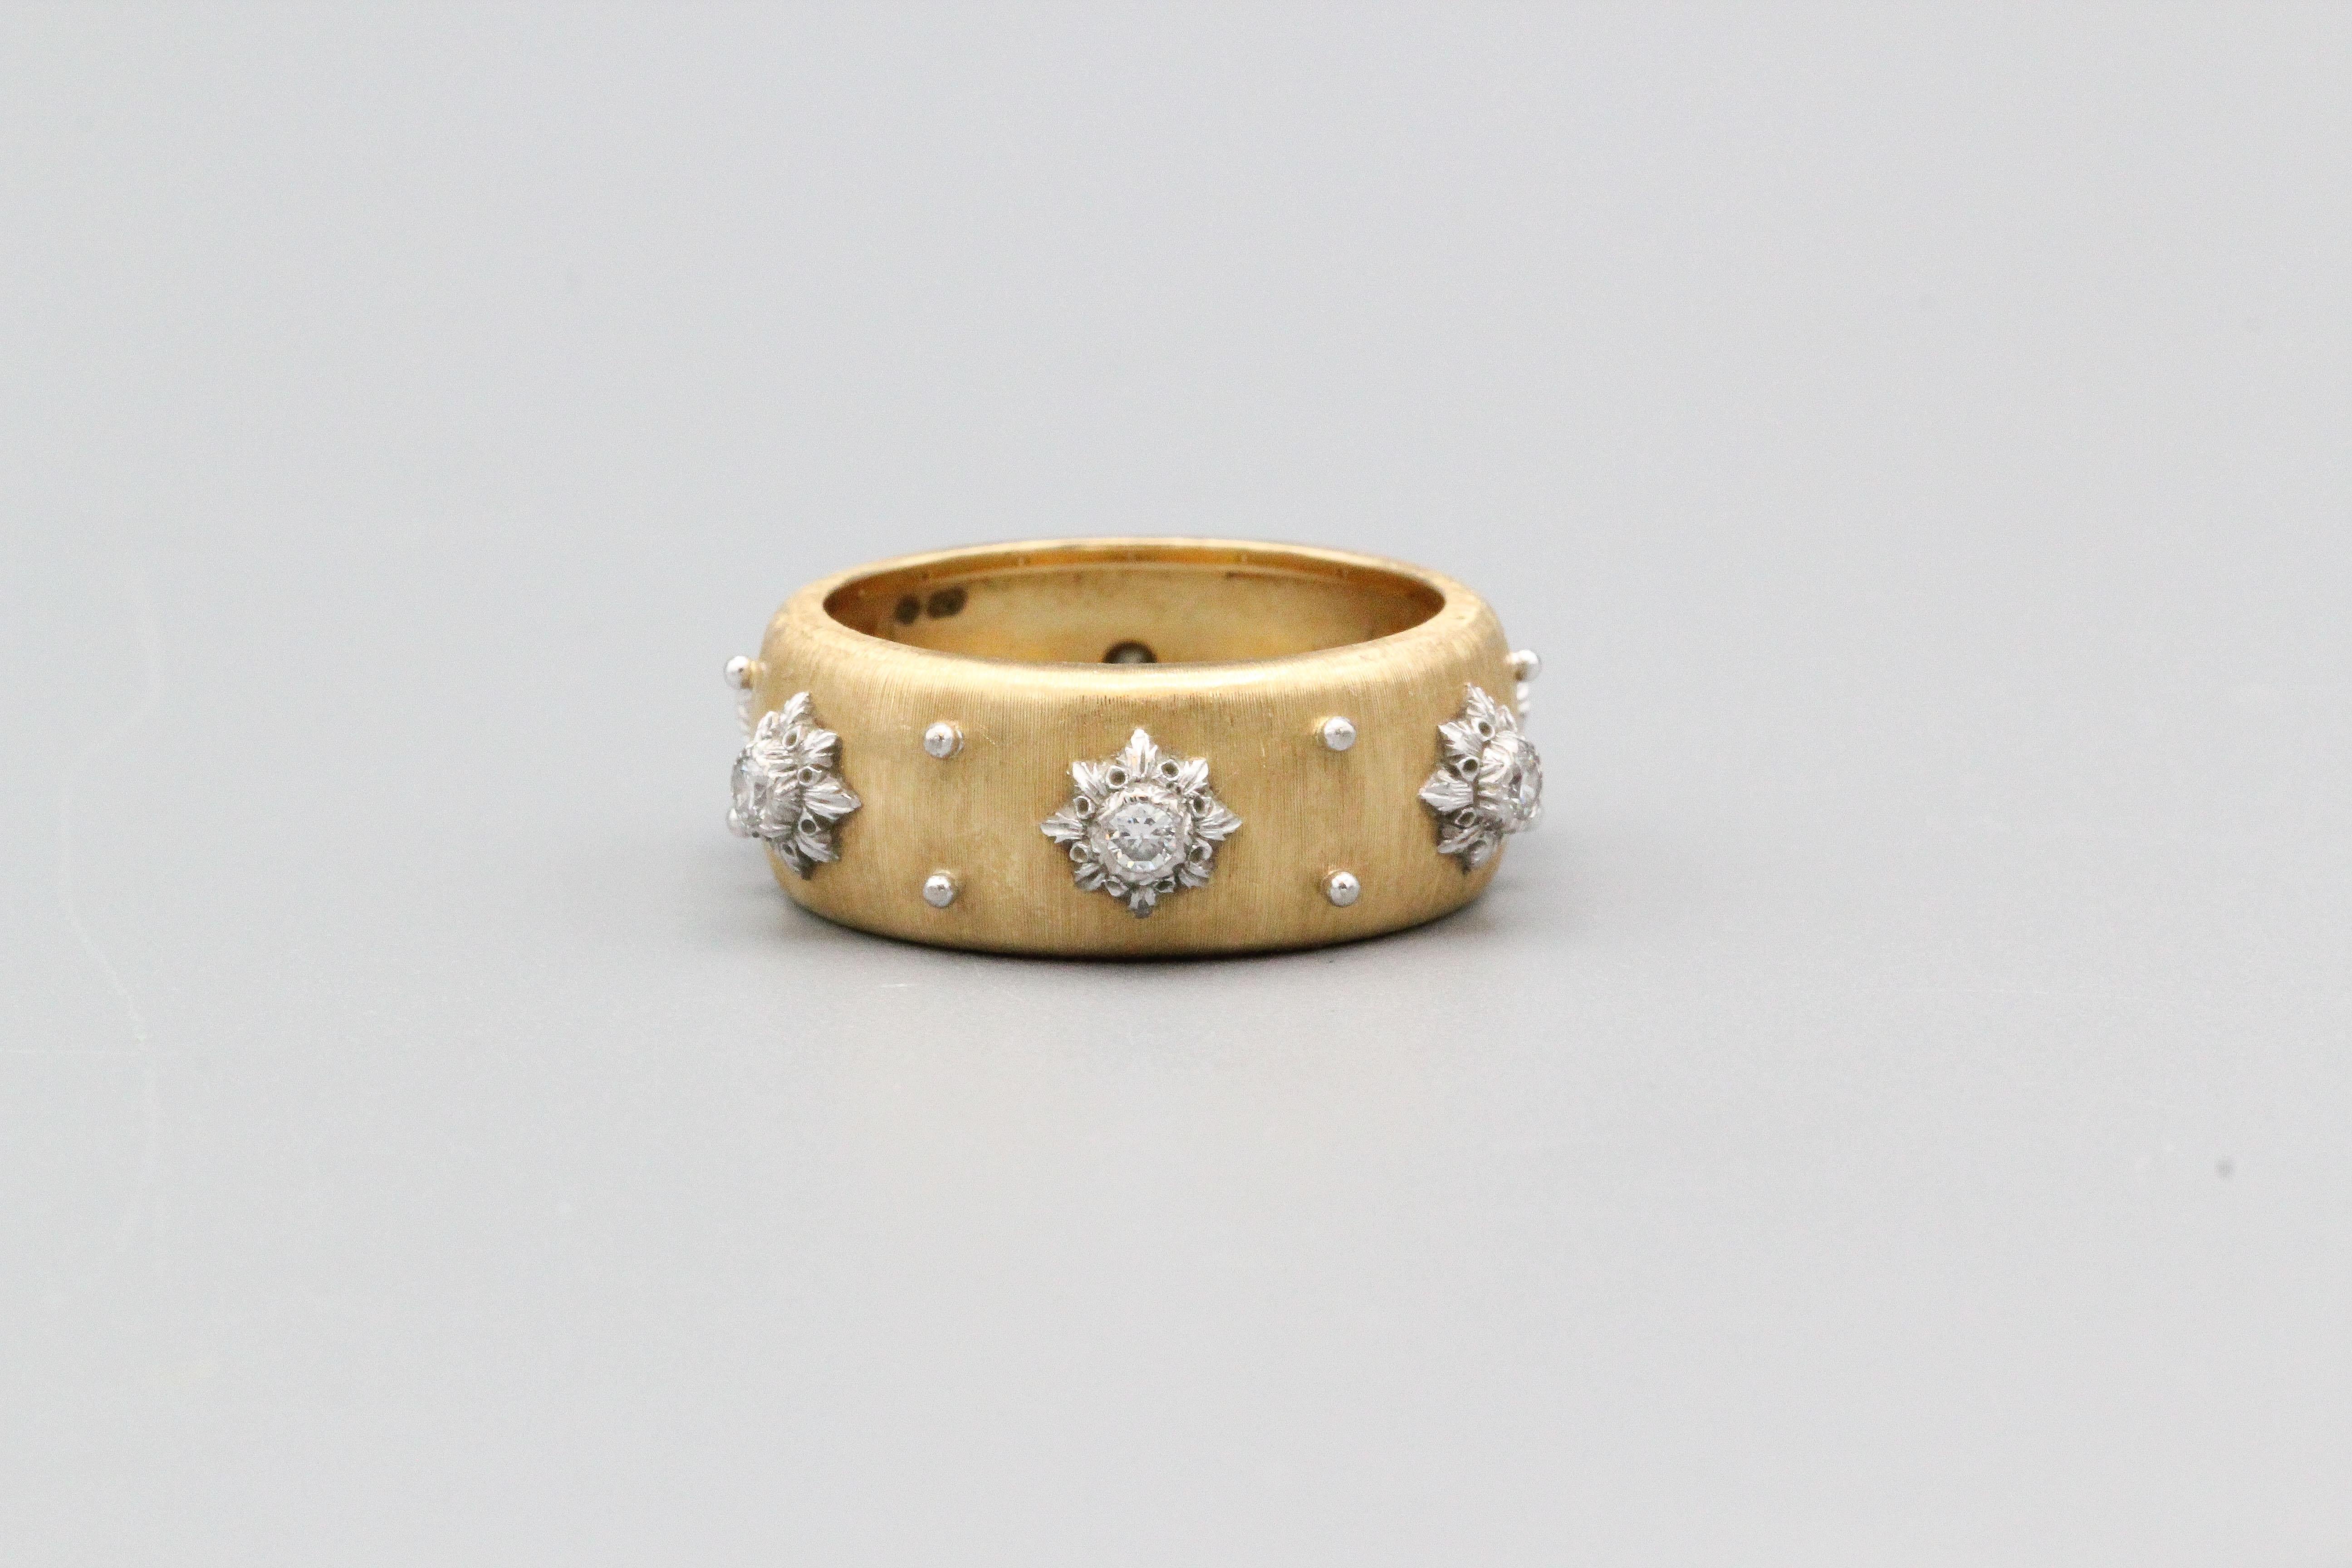 Fine 18K yellow and white gold diamond band ring from the Macri collection by Buccellati. It features the rigato motif, a florentine finish hand made and designed to bring out a different perspective on gold.  Set with high grade round brilliant cut